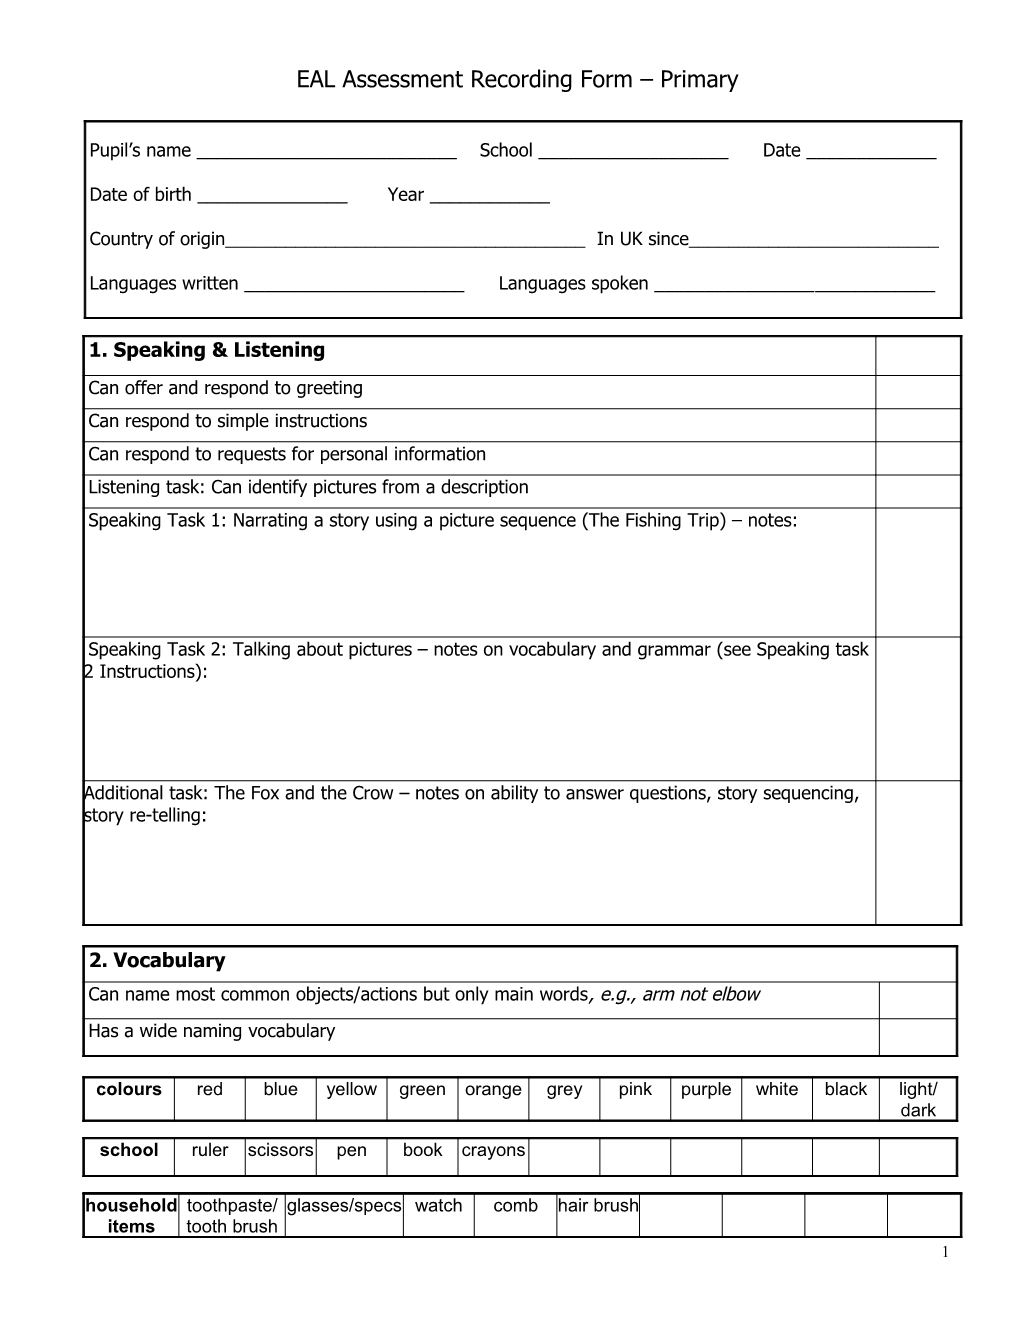 EAL Assessment Recording Form Primary